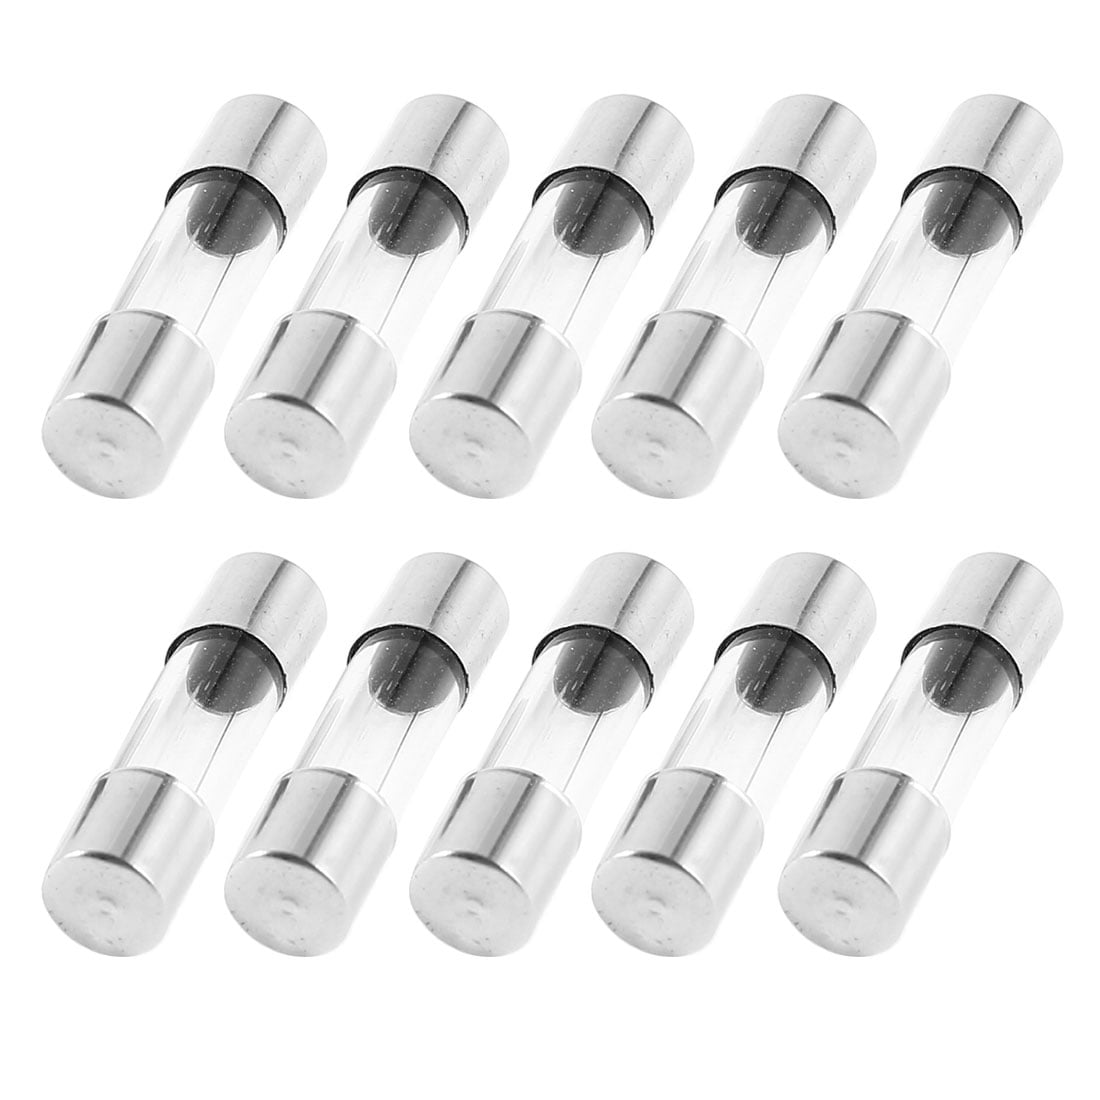 Sourcingmap 10 Pcs Fast Blow Type Glass Tube Fuses 6x30mm 250V 10A